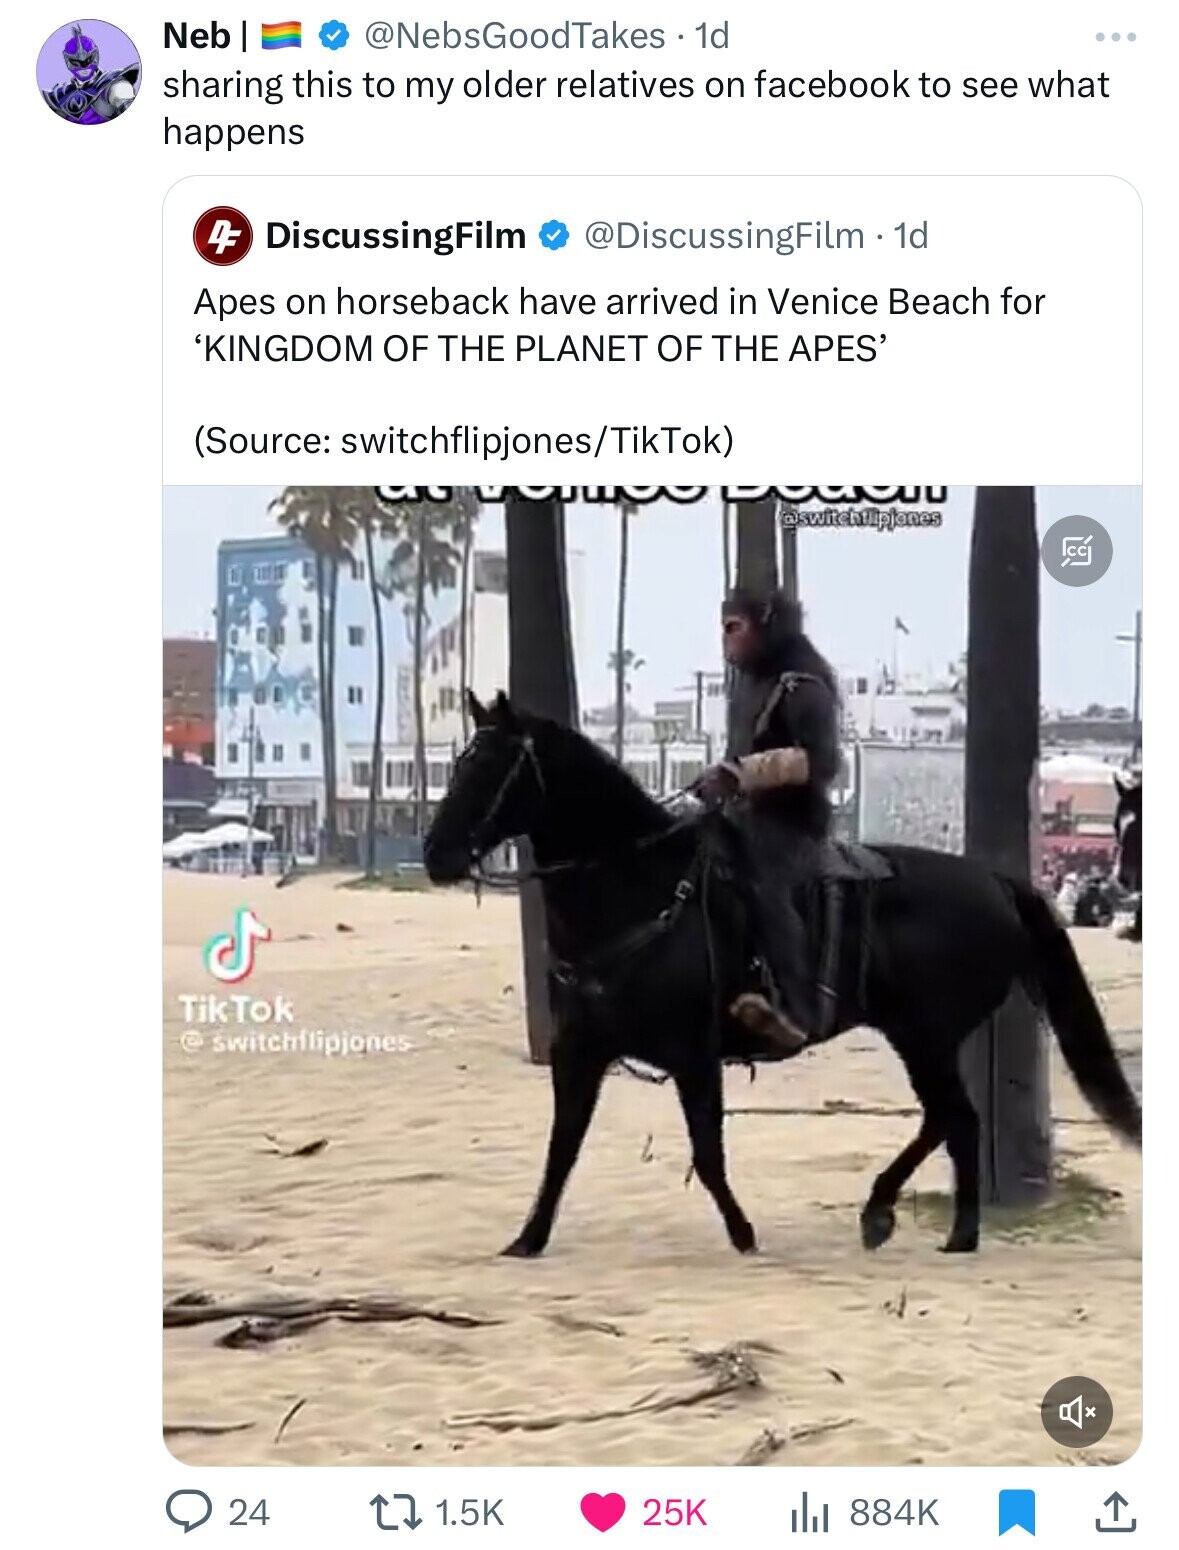 stallion - Neb | 1d . sharing this to my older relatives on facebook to see what happens 4 DiscussingFilm . 1d Apes on horseback have arrived in Venice Beach for 'Kingdom Of The Planet Of The Apes' Source switchflipjonesTikTok Tik Tok switchflipjones Uu t